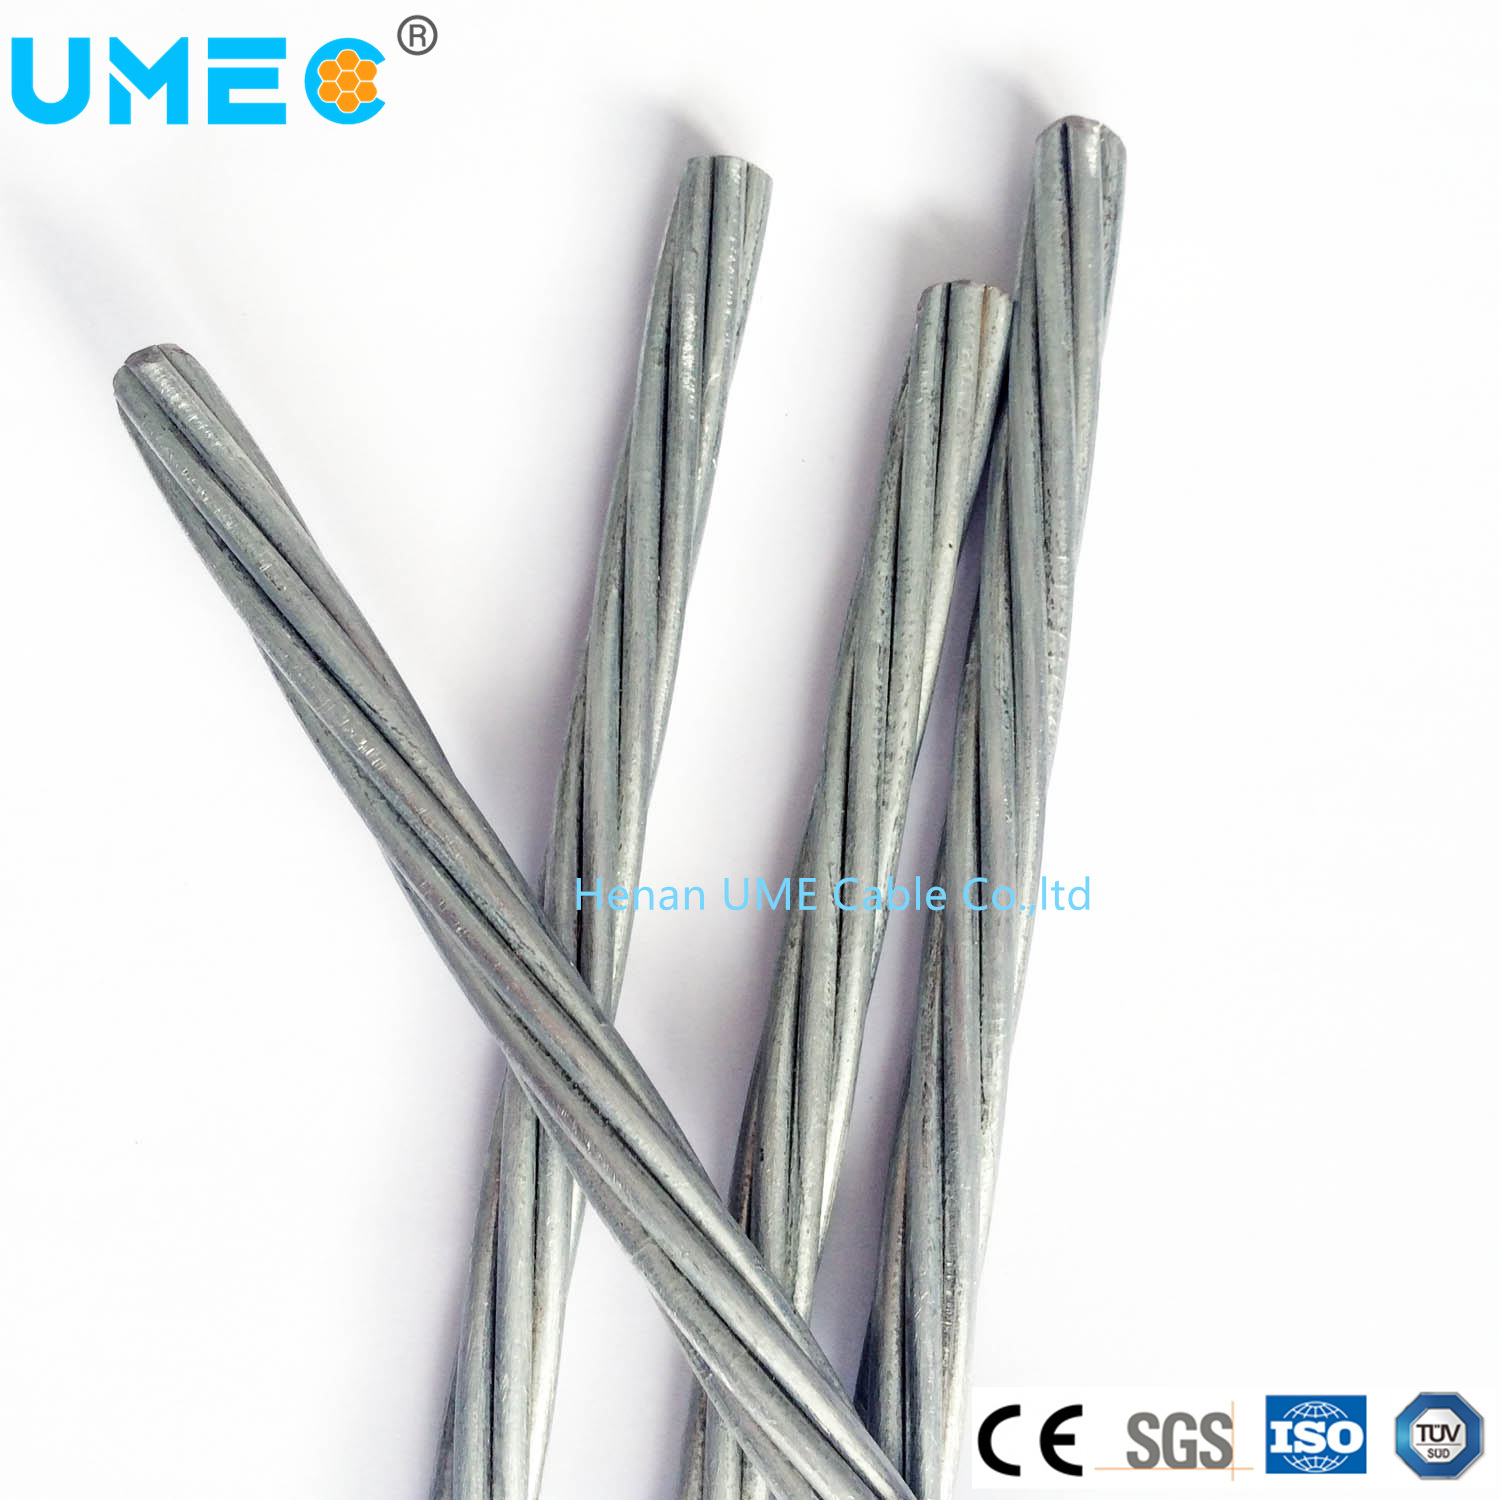 High Tensile Building Galvanized Steel Wire Strand/Stay Wire/Guy Wire 10 12 20mm for Overhead Dead End Accessories